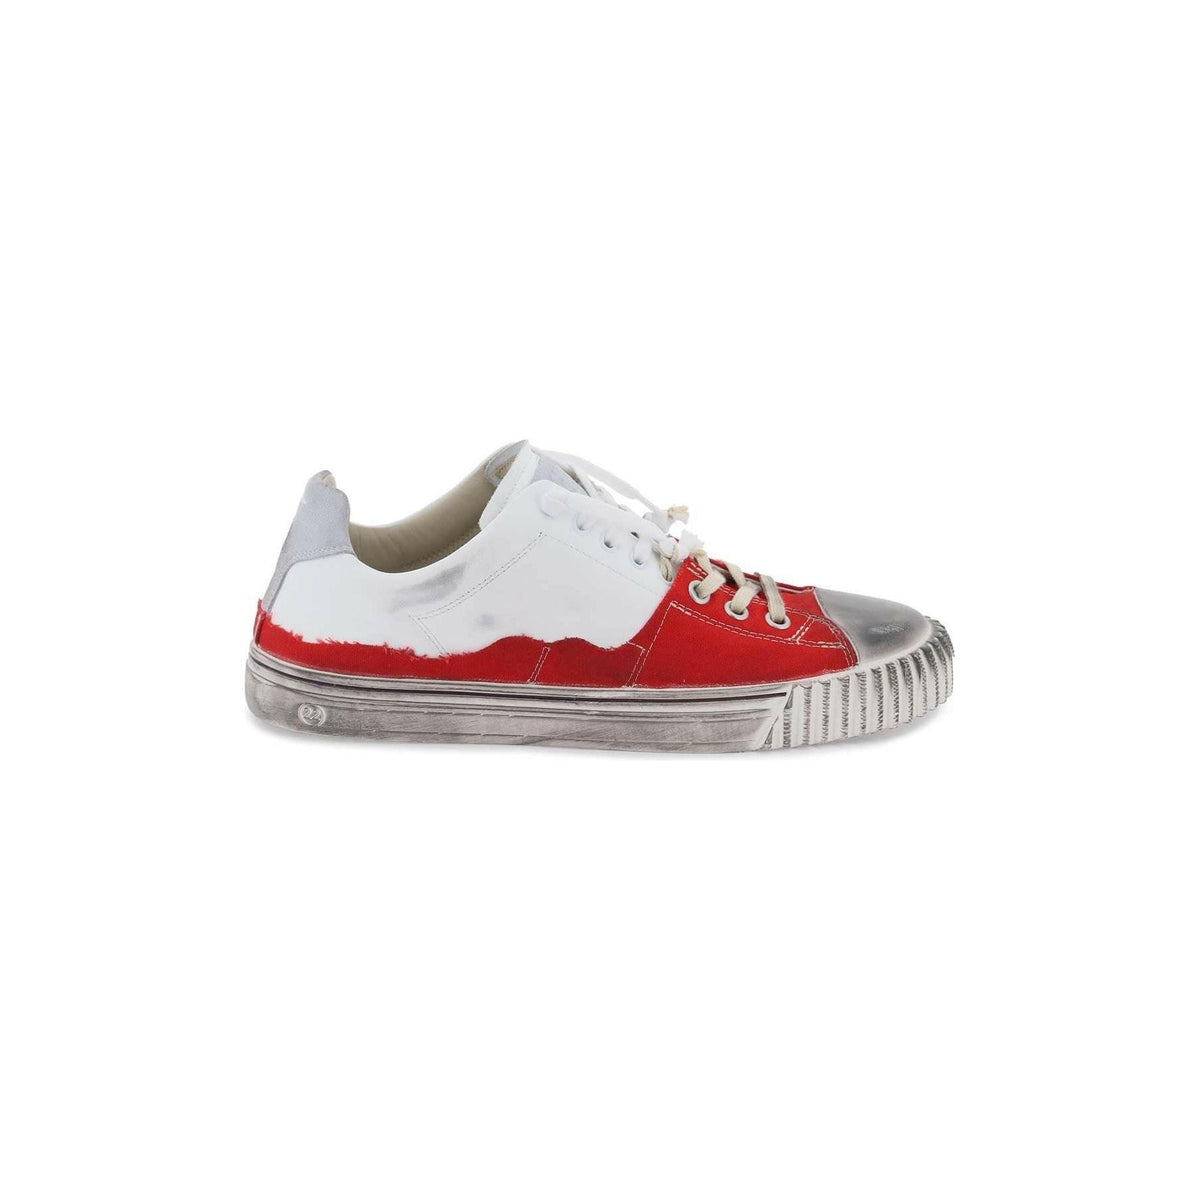 White and Red New Evolution Leather and Canvas Sneakers MAISON MARGIELA JOHN JULIA.